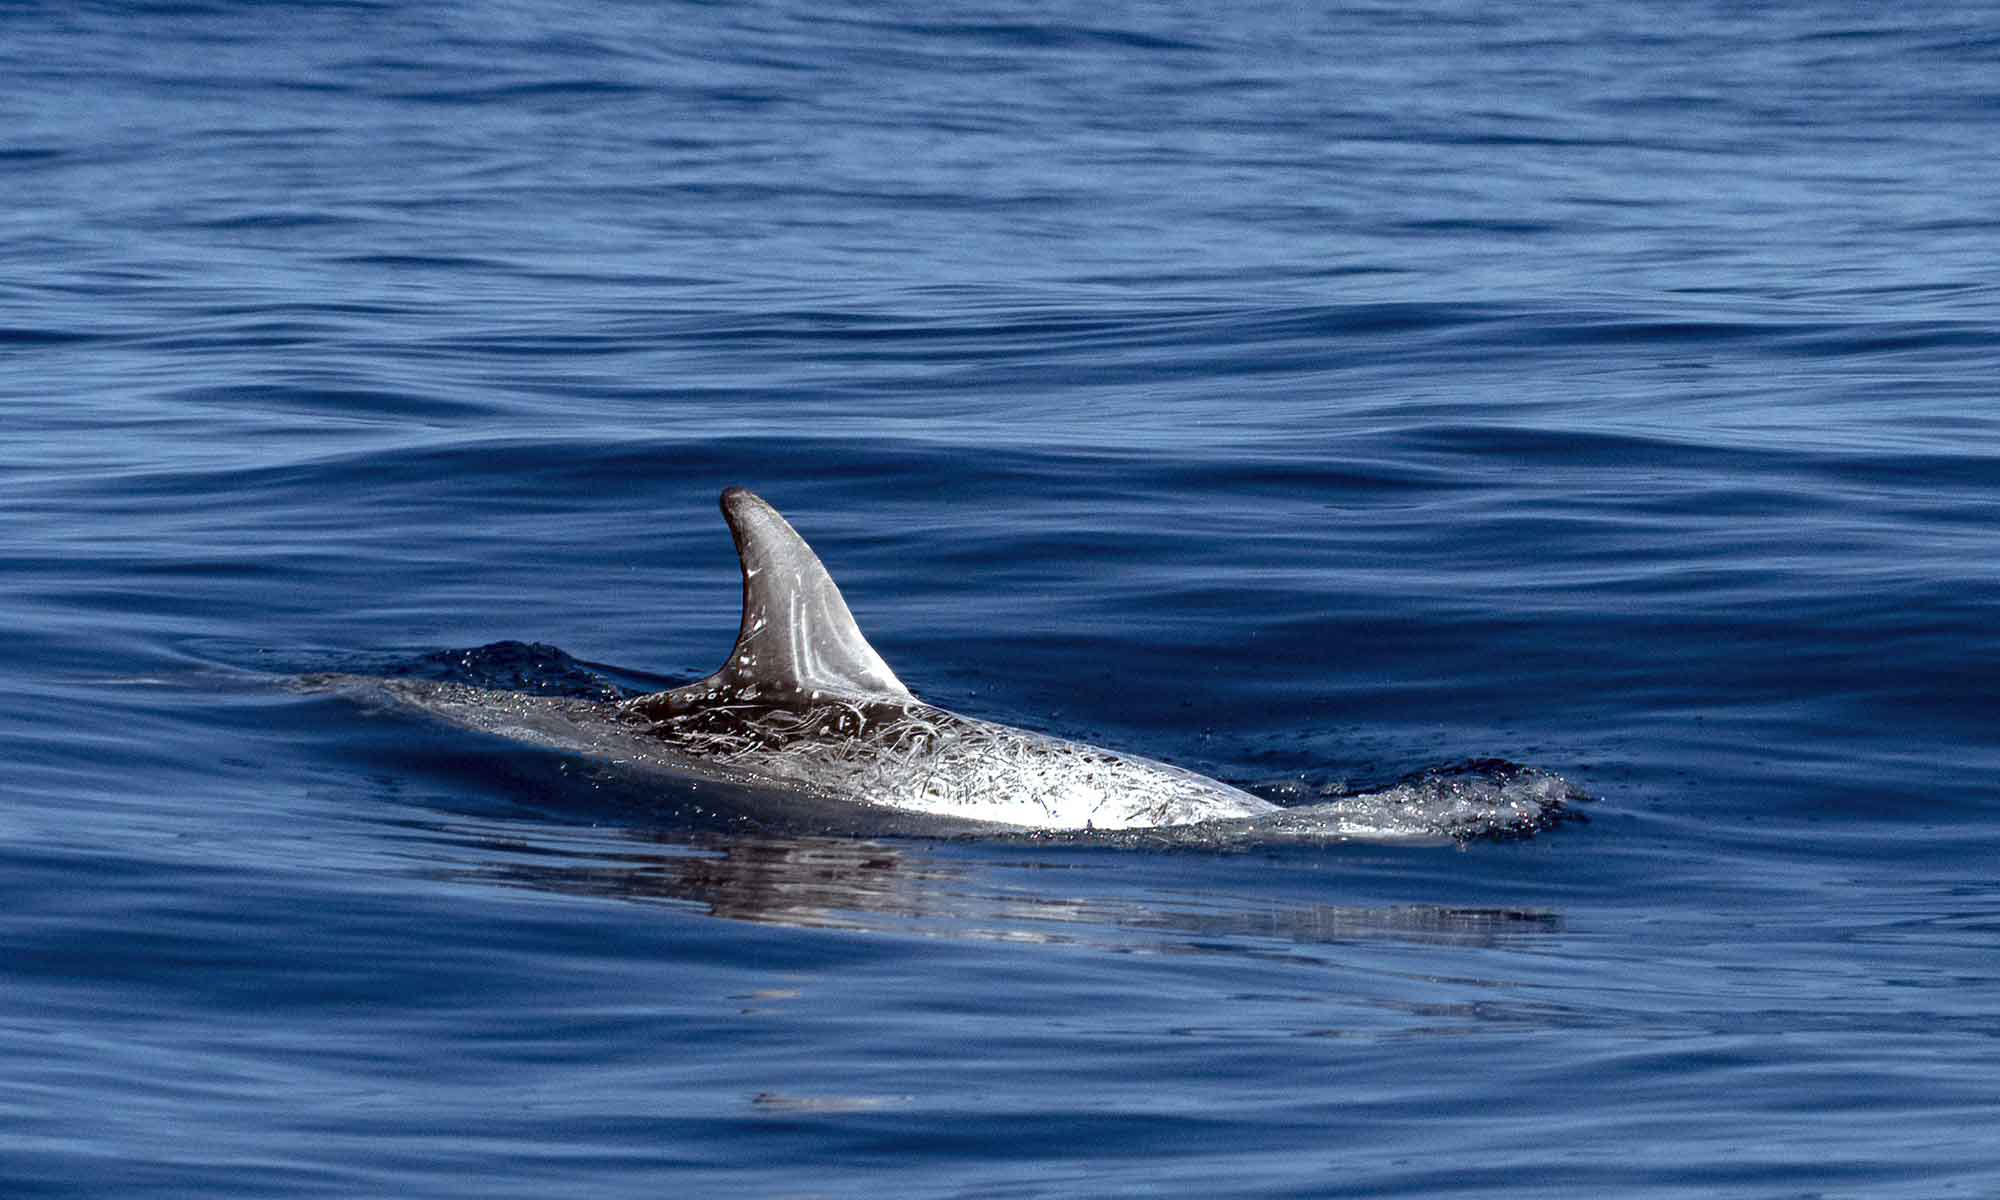 Risso's dolphins are infrequently observed dolphin species in Madeira.